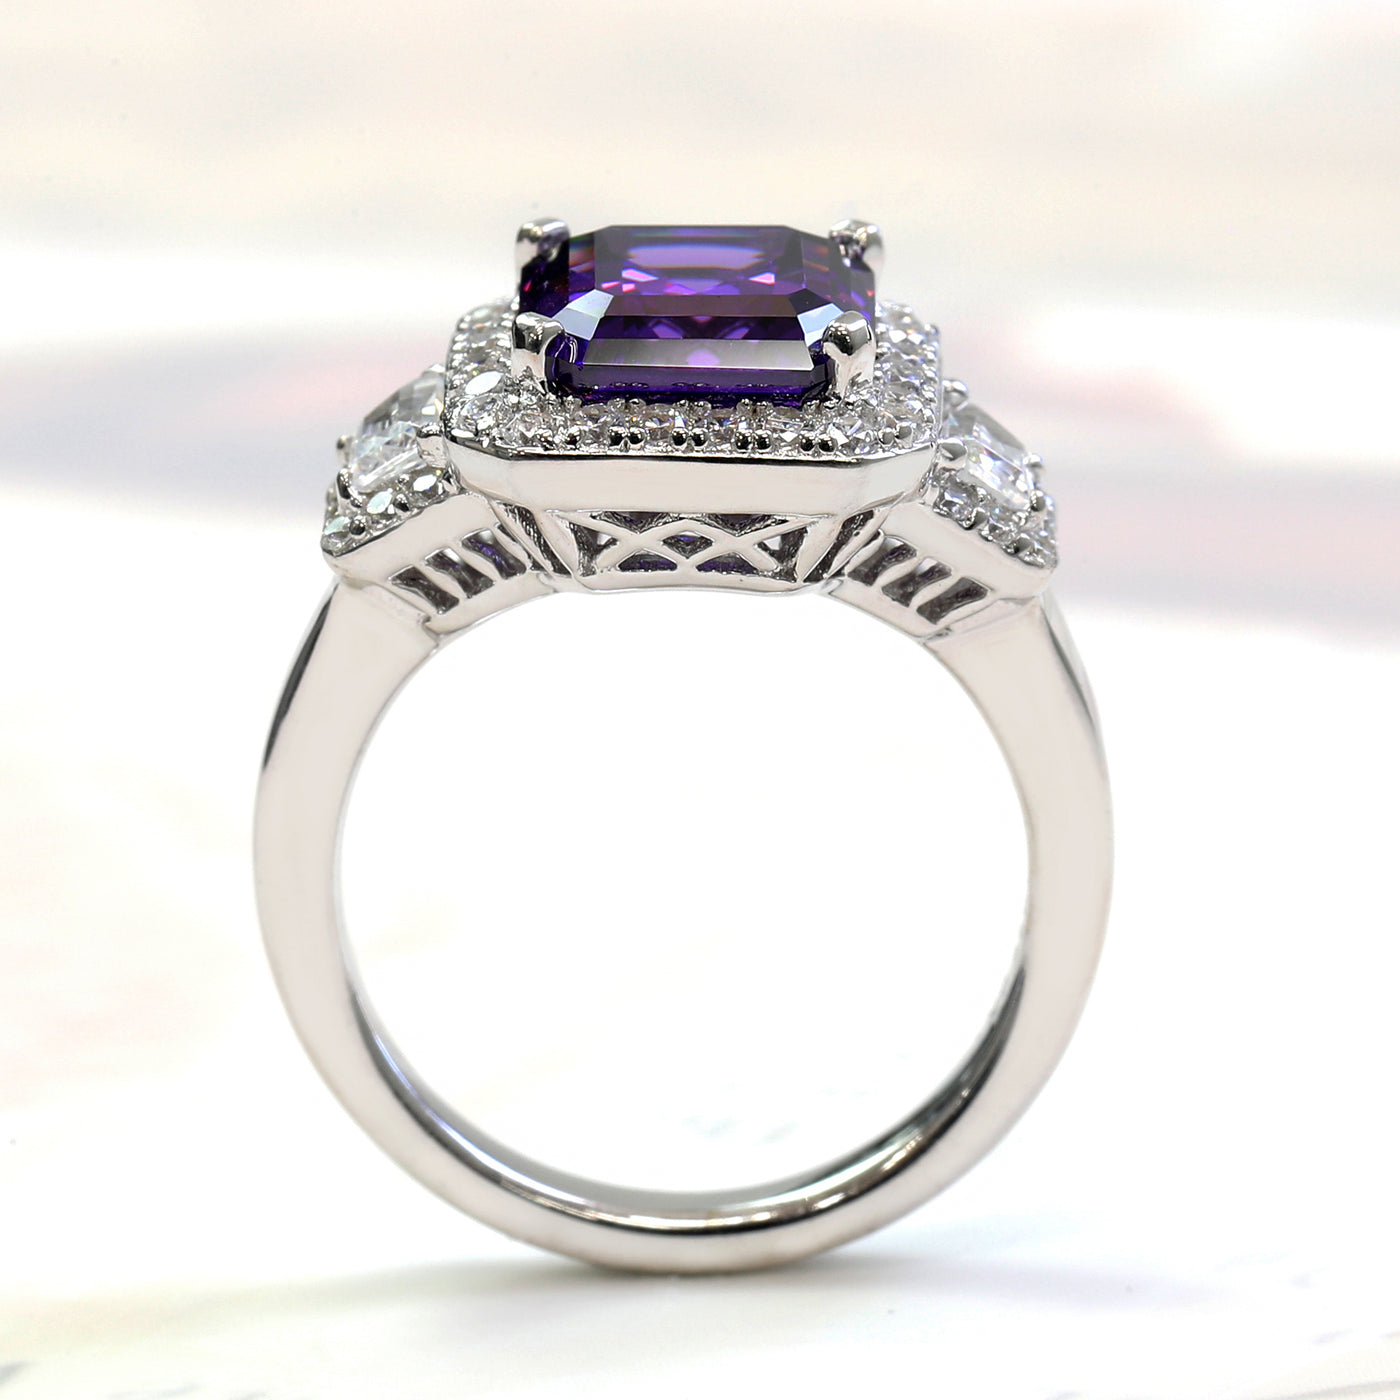 Amethyst Allure Trilogy Ring, 3 CT